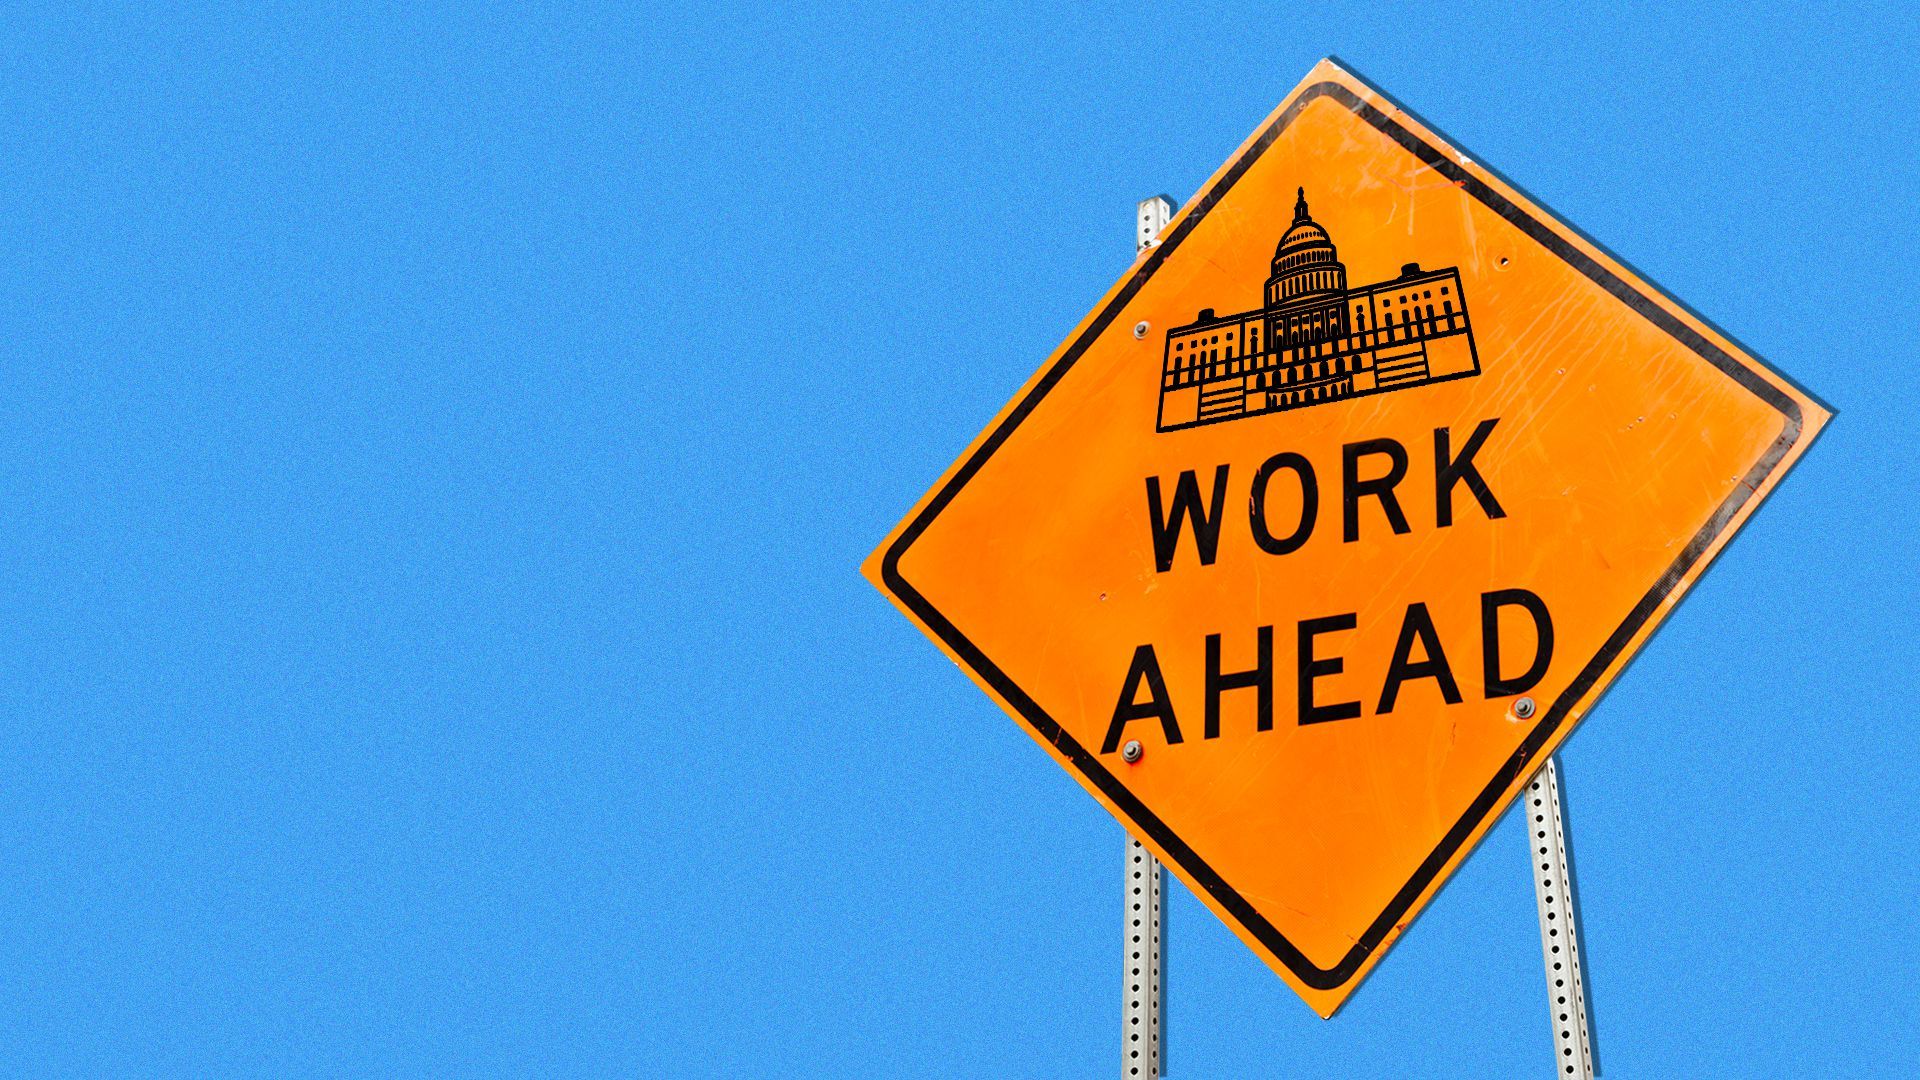 Illustration of a construction sign that reads “Work Ahead” with a symbol of the Capitol.